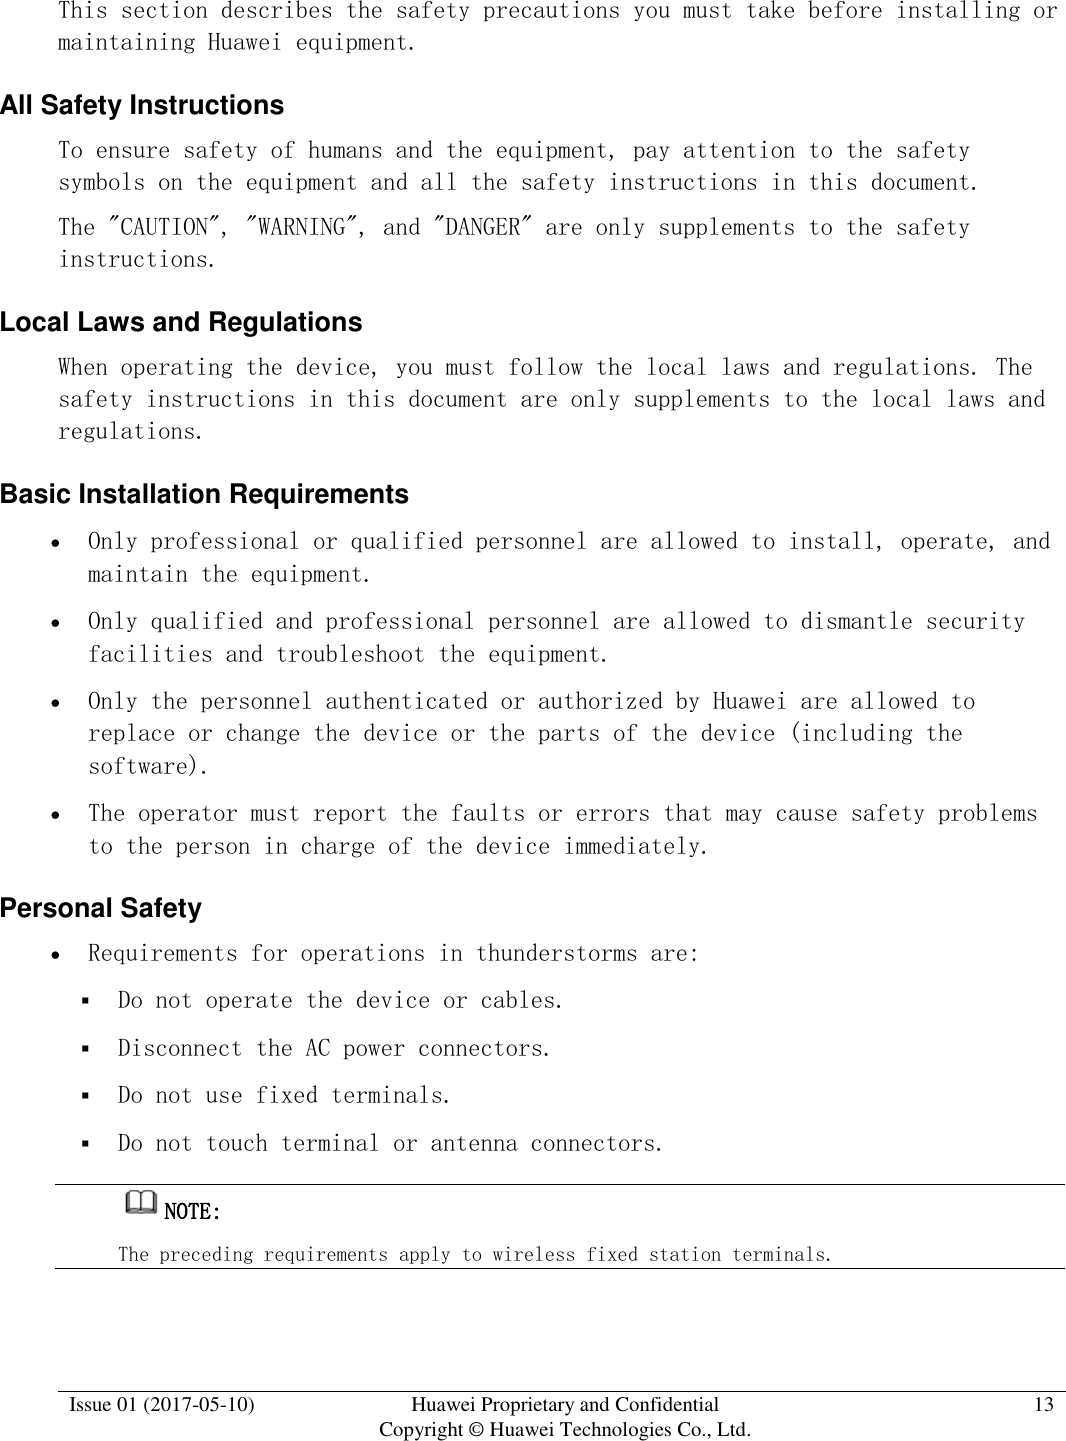  Issue 01 (2017-05-10) Huawei Proprietary and Confidential      Copyright © Huawei Technologies Co., Ltd. 13  This section describes the safety precautions you must take before installing or maintaining Huawei equipment. All Safety Instructions To ensure safety of humans and the equipment, pay attention to the safety symbols on the equipment and all the safety instructions in this document. The &quot;CAUTION&quot;, &quot;WARNING&quot;, and &quot;DANGER&quot; are only supplements to the safety instructions.  Local Laws and Regulations  When operating the device, you must follow the local laws and regulations. The safety instructions in this document are only supplements to the local laws and regulations.  Basic Installation Requirements  Only professional or qualified personnel are allowed to install, operate, and maintain the equipment.   Only qualified and professional personnel are allowed to dismantle security facilities and troubleshoot the equipment.   Only the personnel authenticated or authorized by Huawei are allowed to replace or change the device or the parts of the device (including the software).   The operator must report the faults or errors that may cause safety problems to the person in charge of the device immediately.  Personal Safety  Requirements for operations in thunderstorms are:  Do not operate the device or cables.  Disconnect the AC power connectors.  Do not use fixed terminals.  Do not touch terminal or antenna connectors. NOTE:  The preceding requirements apply to wireless fixed station terminals.  